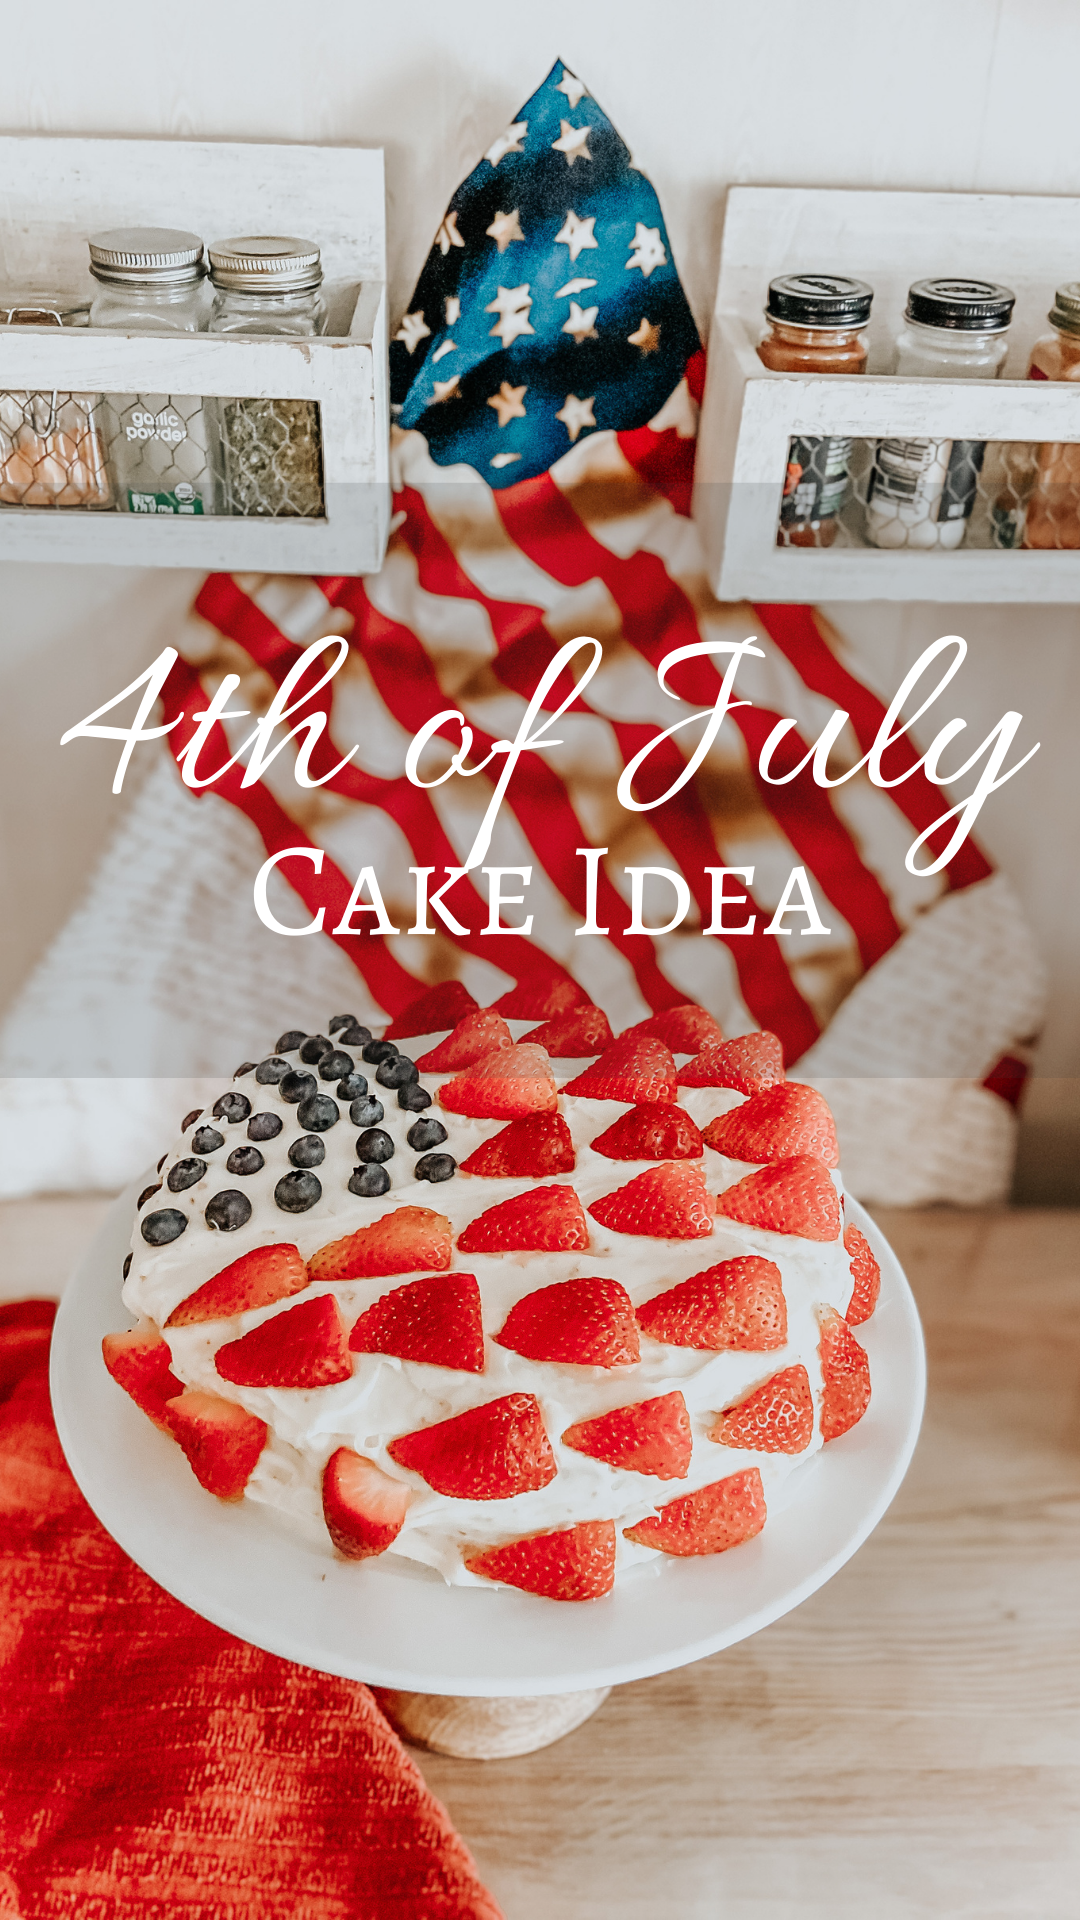 4th of july einkorn cake with blueberries and strawberries shaped like a flag